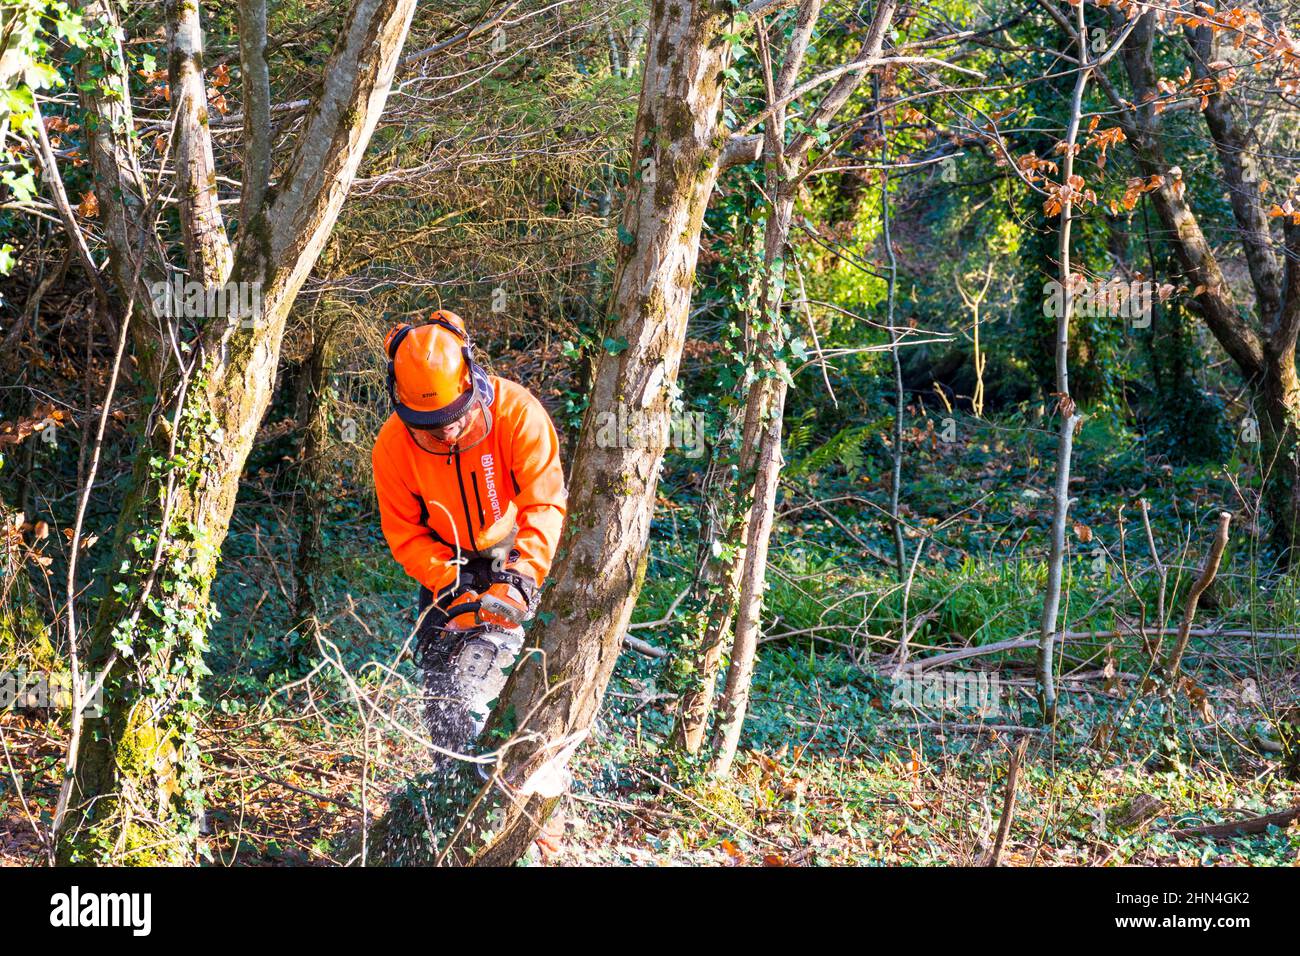 Man cutting tree with chainsaw for wood logs for heating in wood burning stove, County Donegal, Ireland Stock Photo